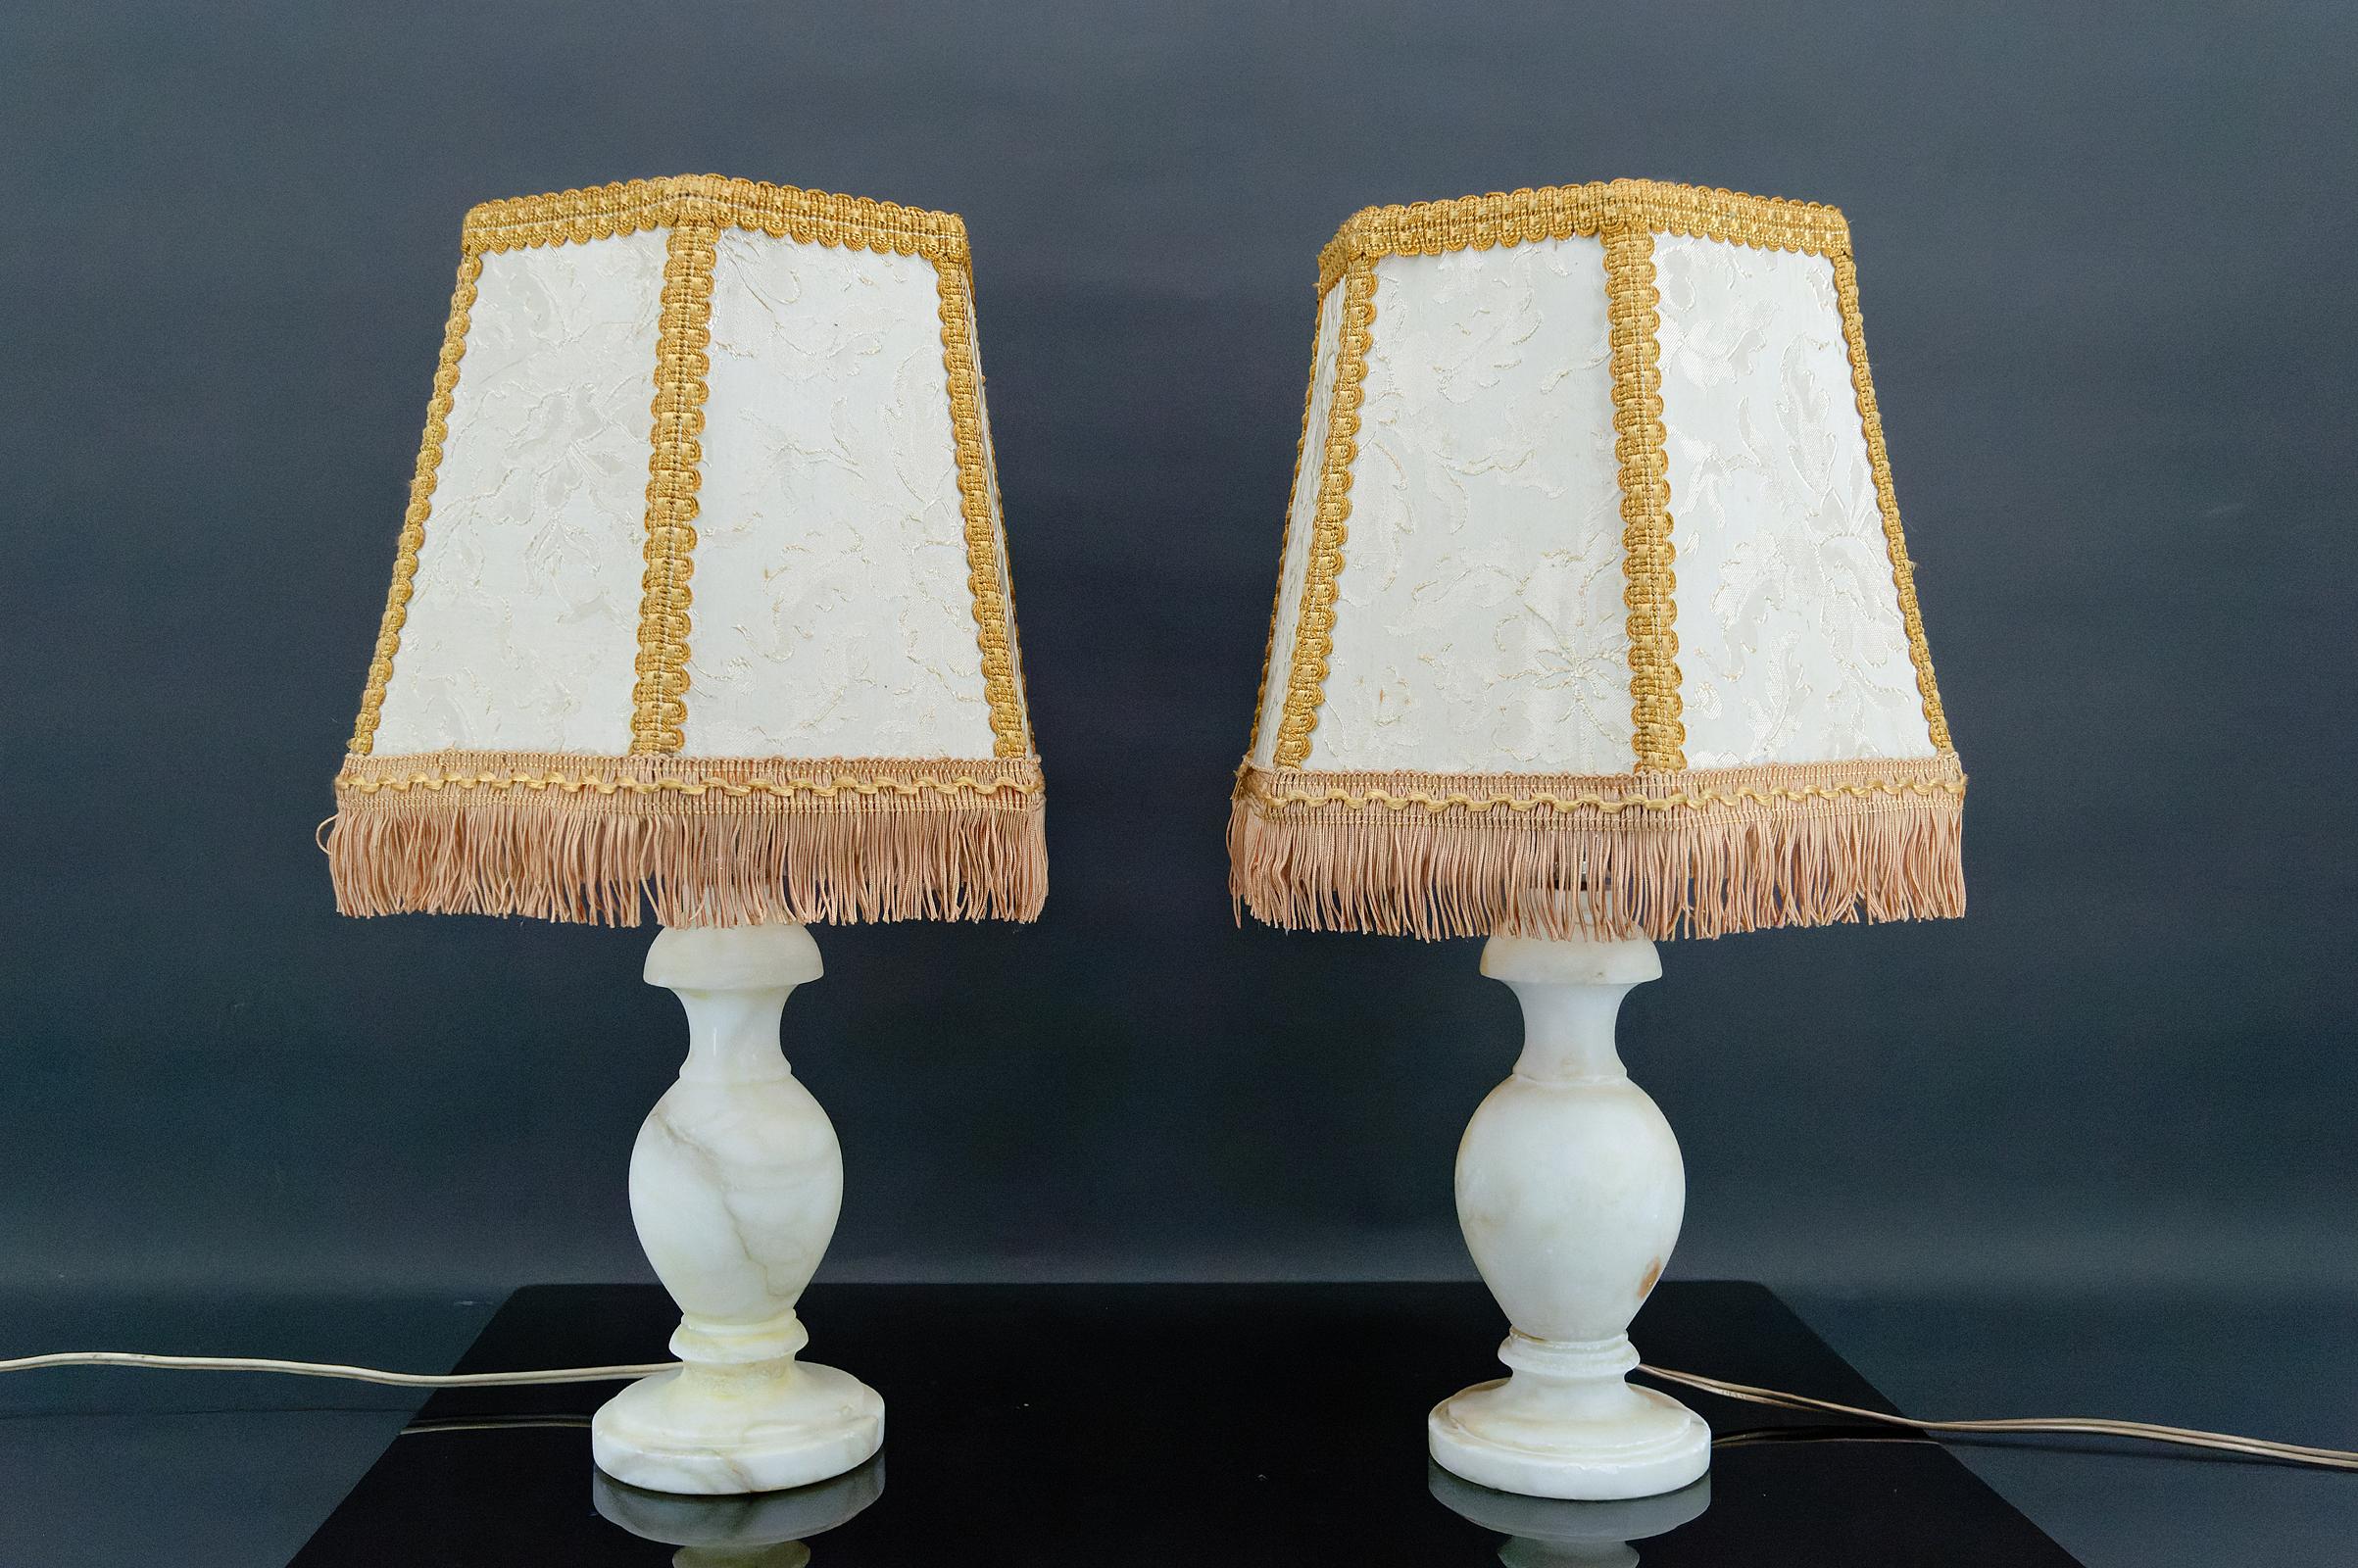 Pair of alabaster lamps
Neo-Classical / Hollywood Regency.
Italy, circa 1940-1950

In good condition.

Dimensions with lampshade:
height 39 cm
diameter 24 cm

Dimensions without lampshade: height 23 cm, diameter 10 cm